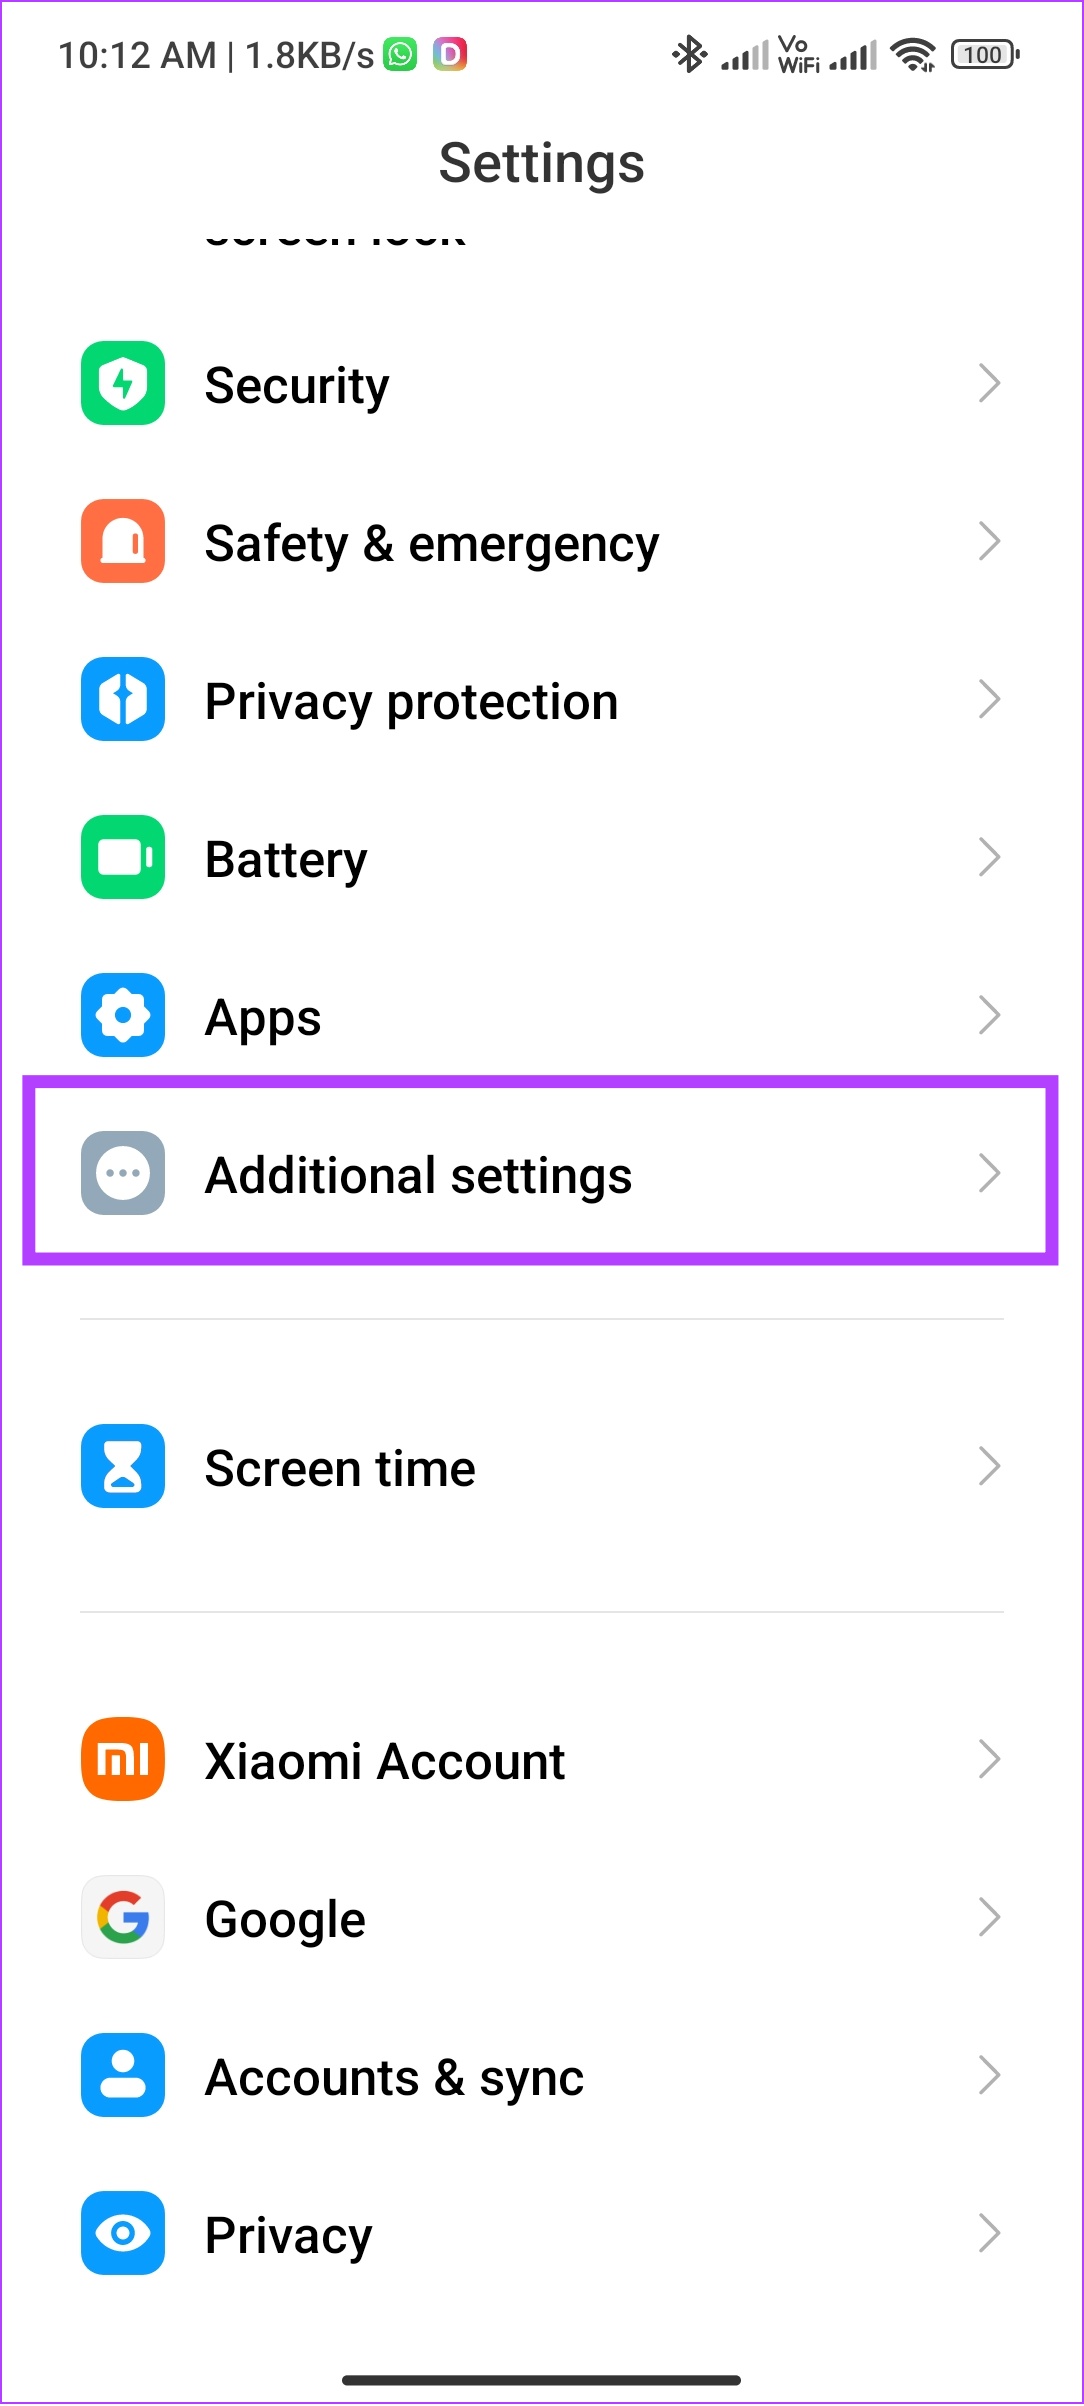 tap additional settings